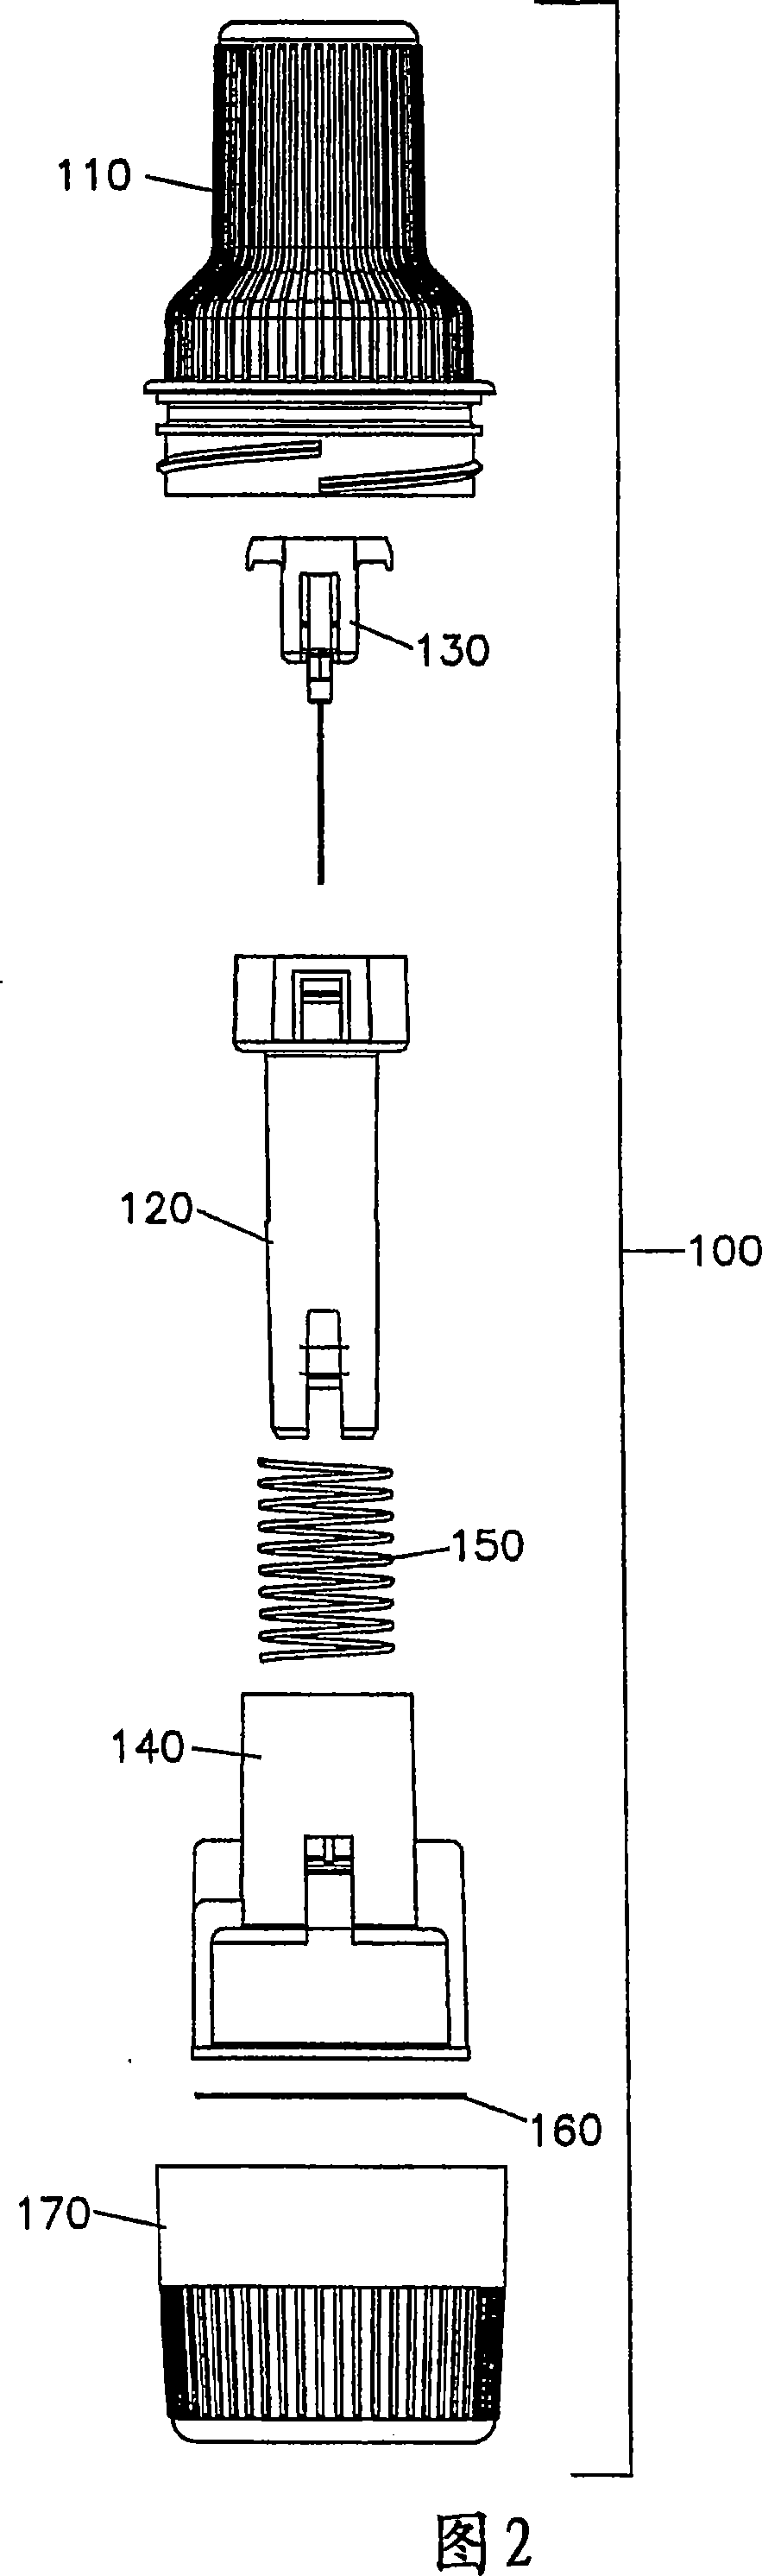 Device and method for insertion of a cannula of an infusion device